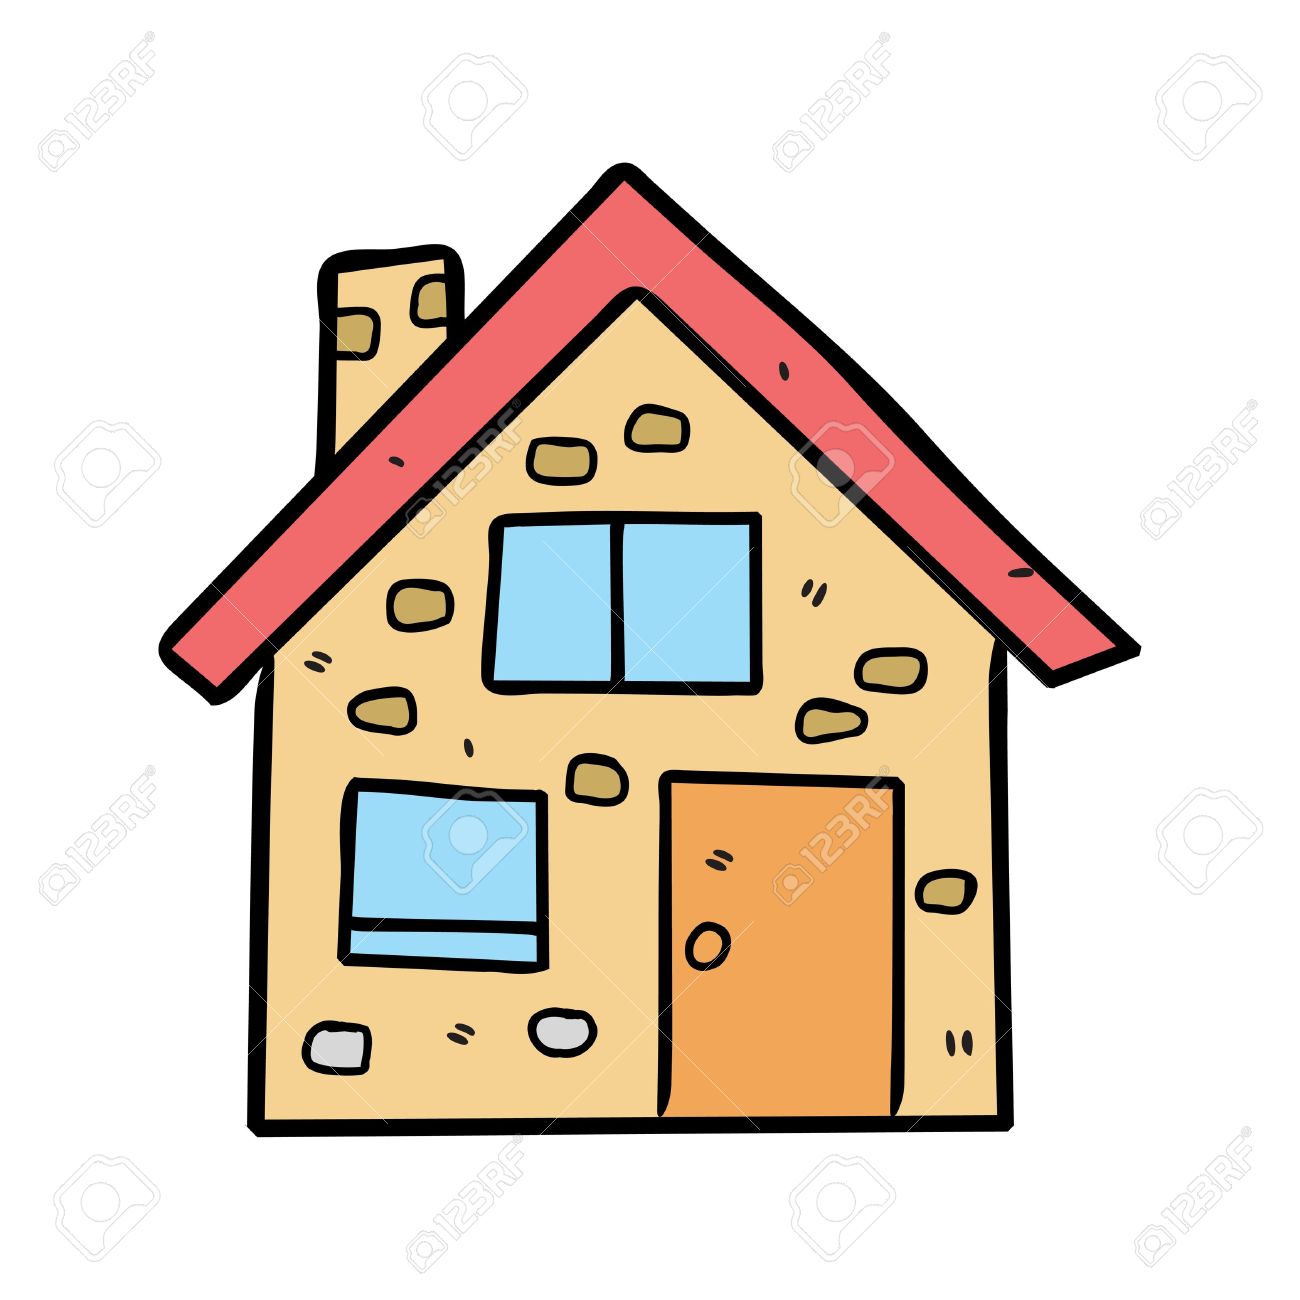 House Images Clipart